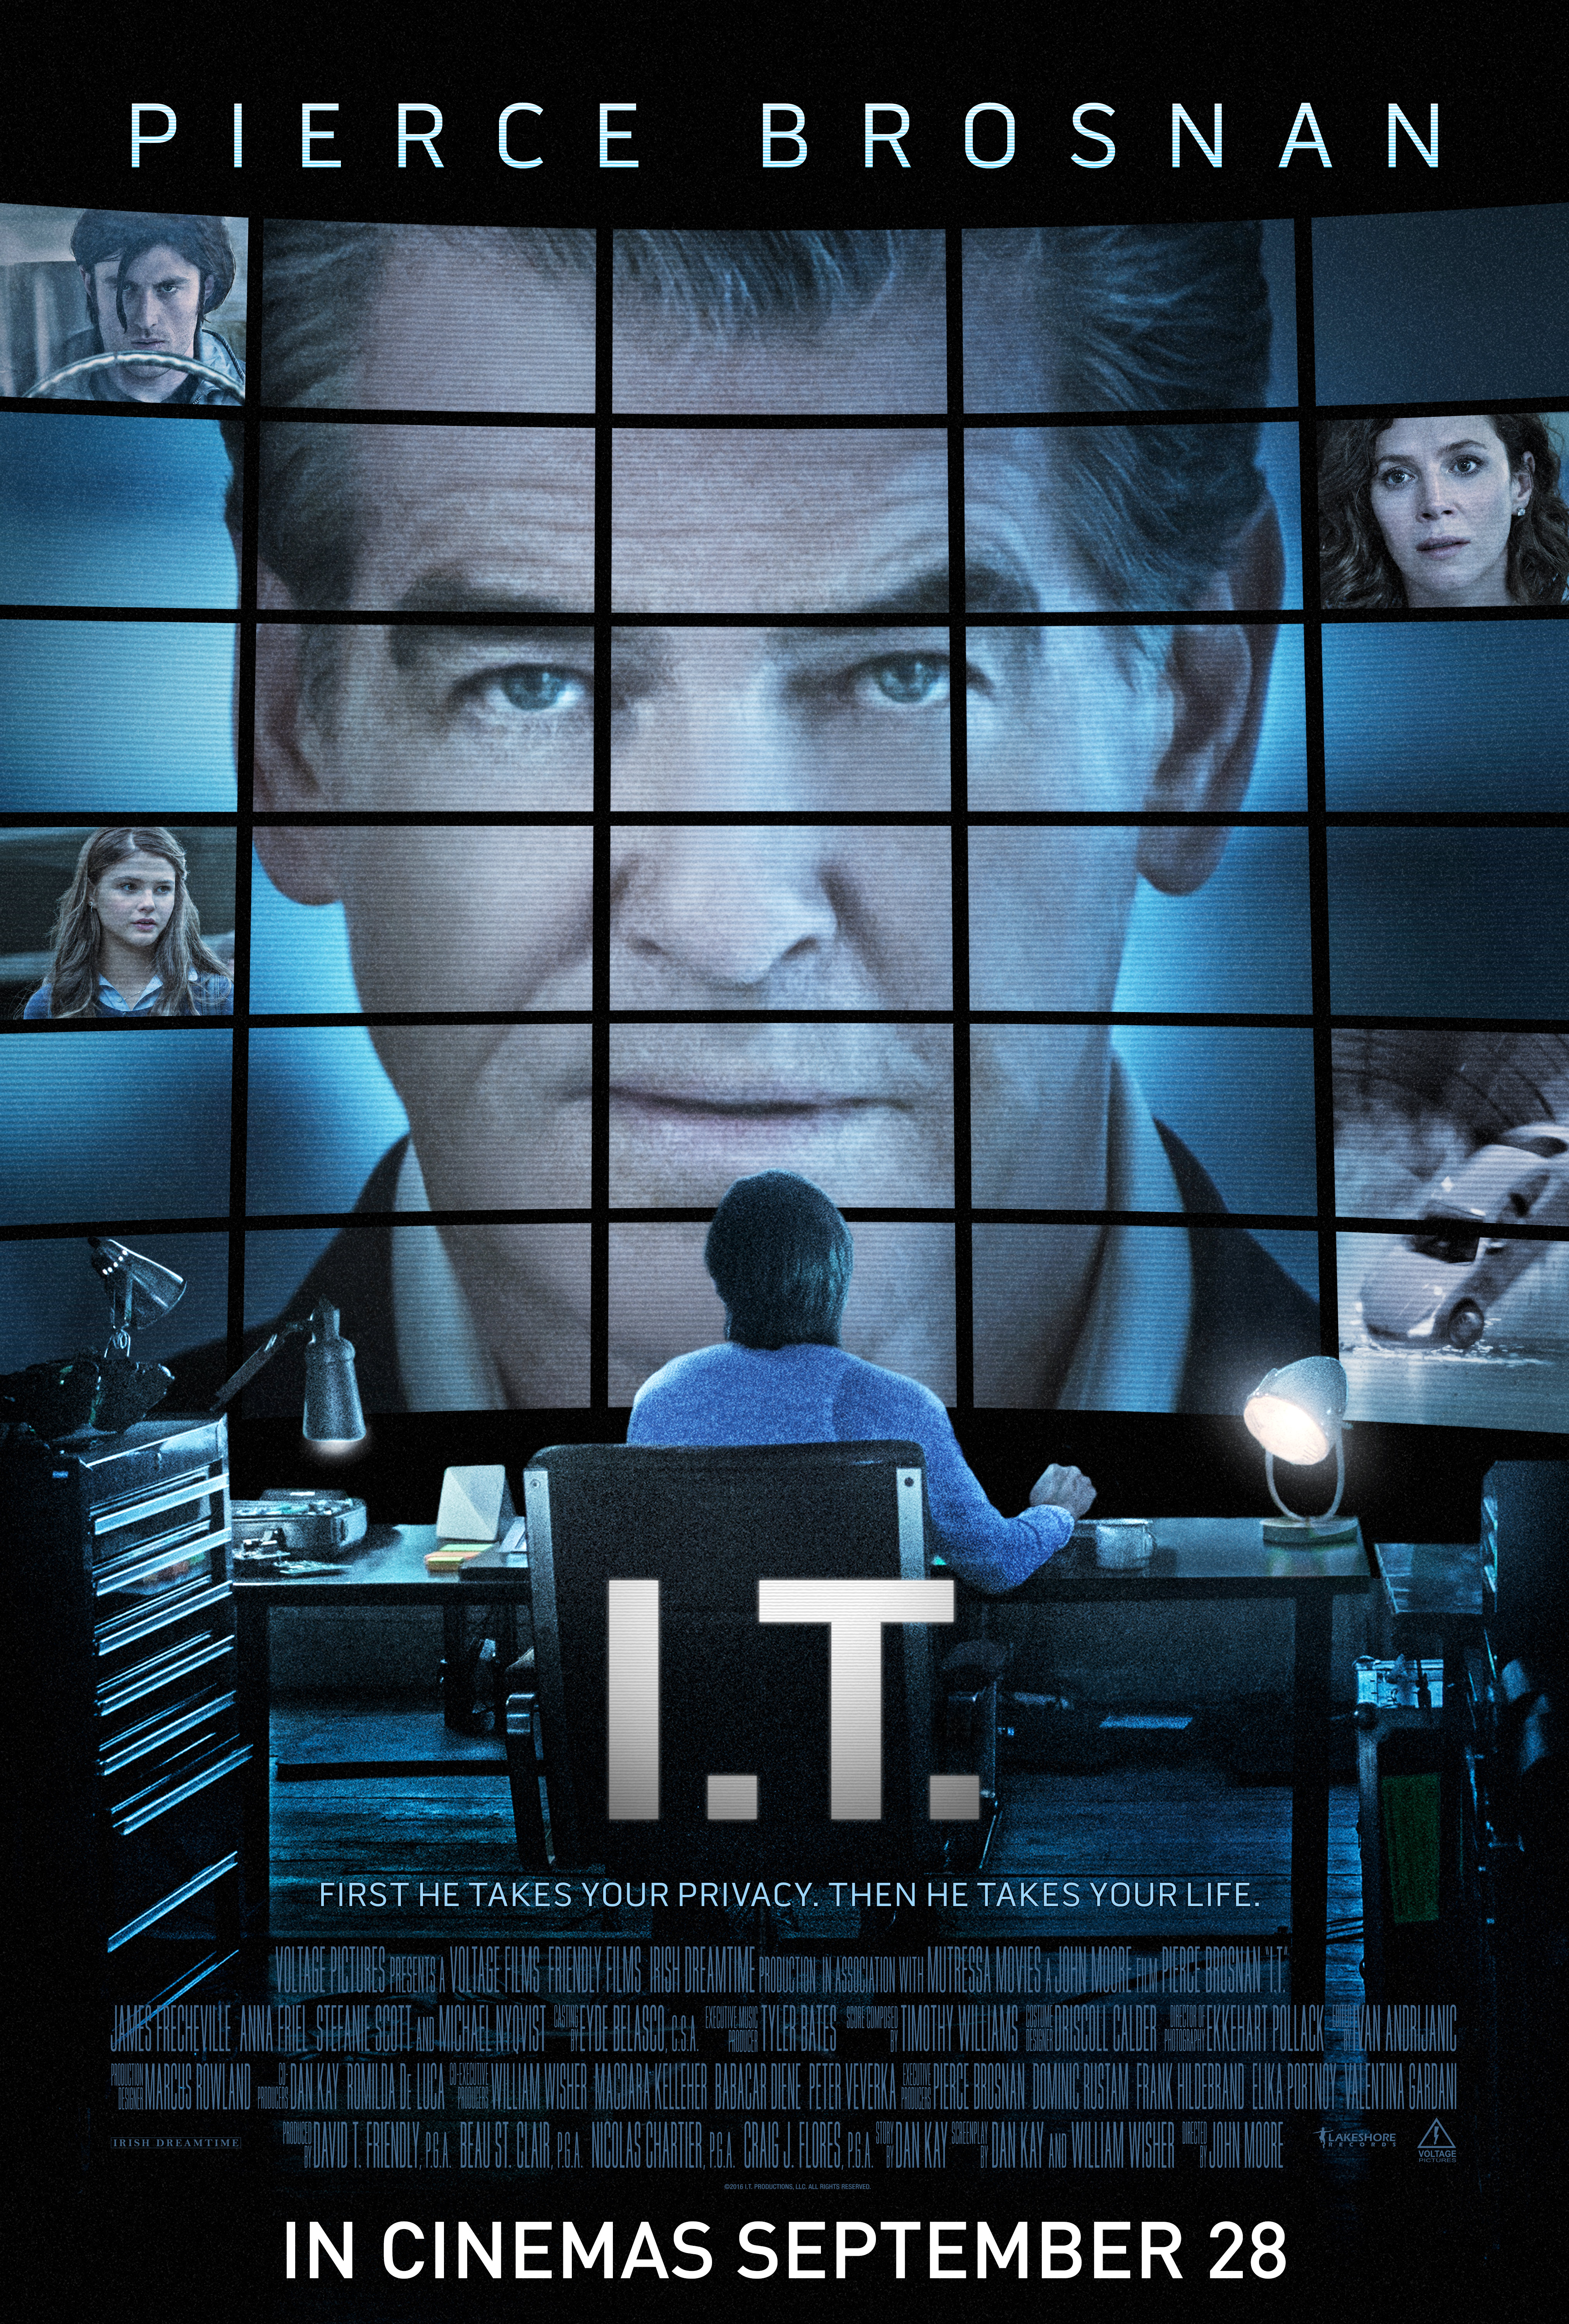 Pierce Brosnan’s Tech Thriller “I.T.” Cast Includes Taylor Swift’s Younger Brother